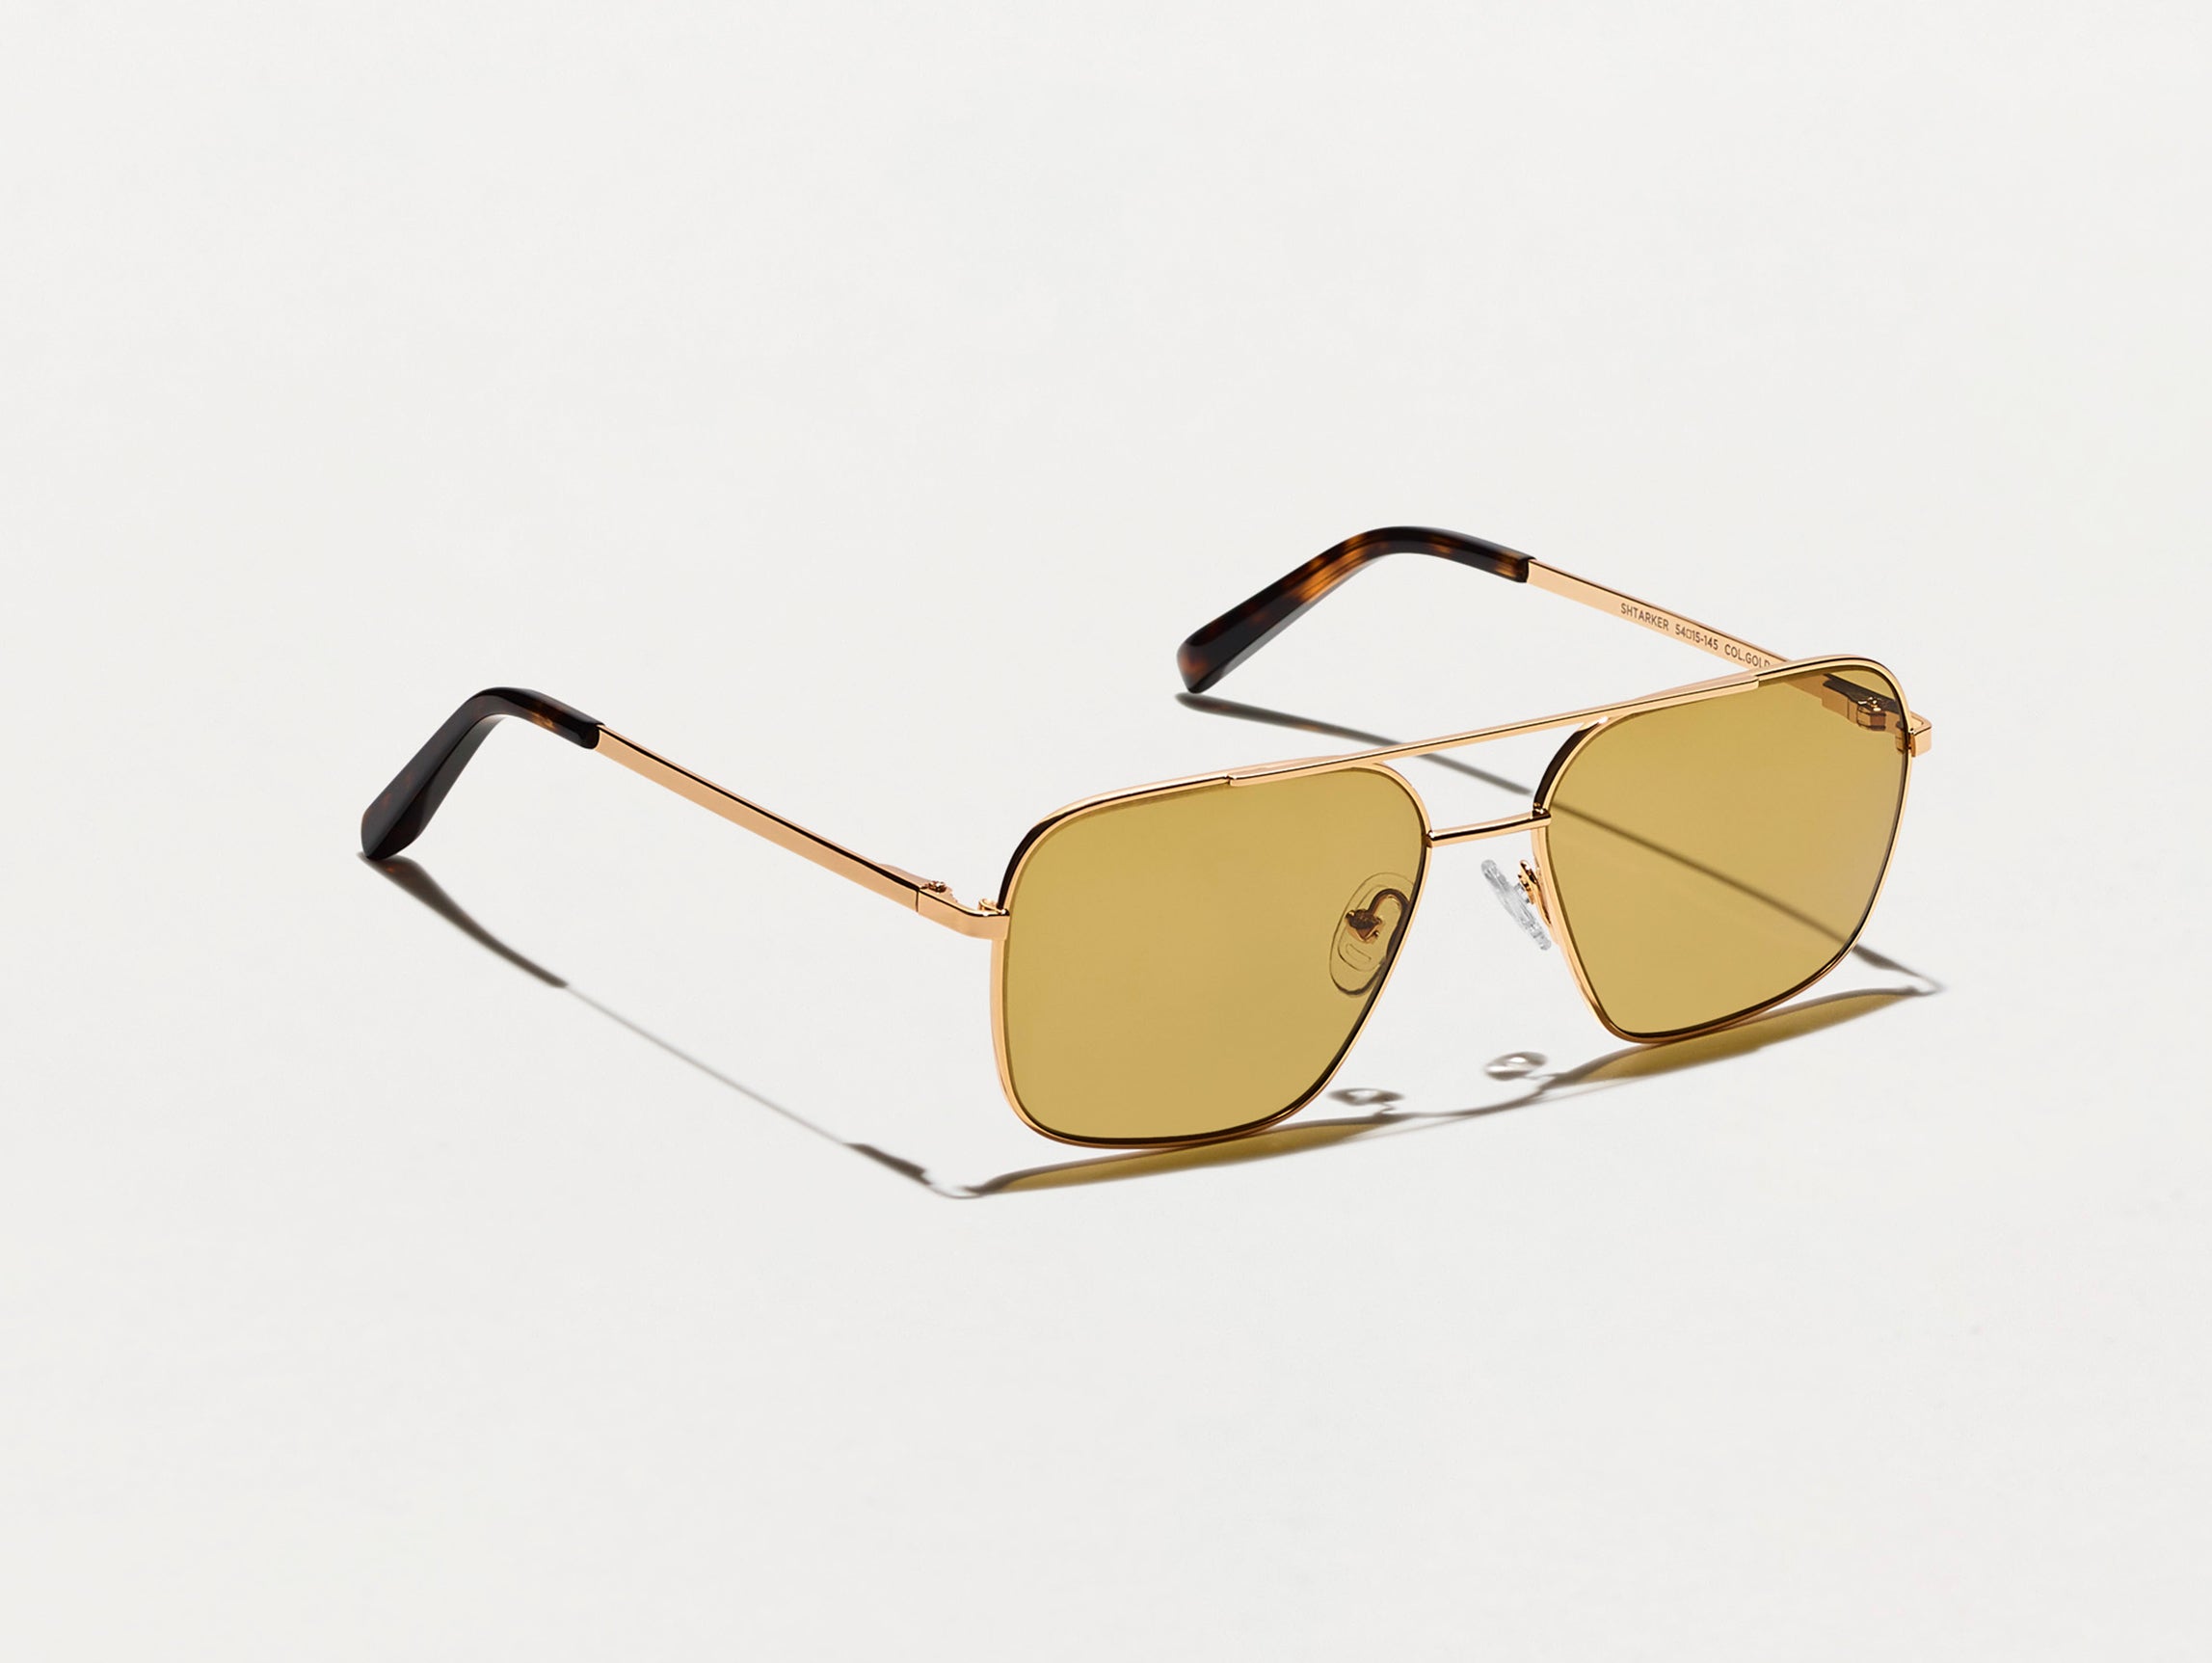 SHTARKER in Gold | Tinted Glasses – MOSCOT NYC SINCE 1915